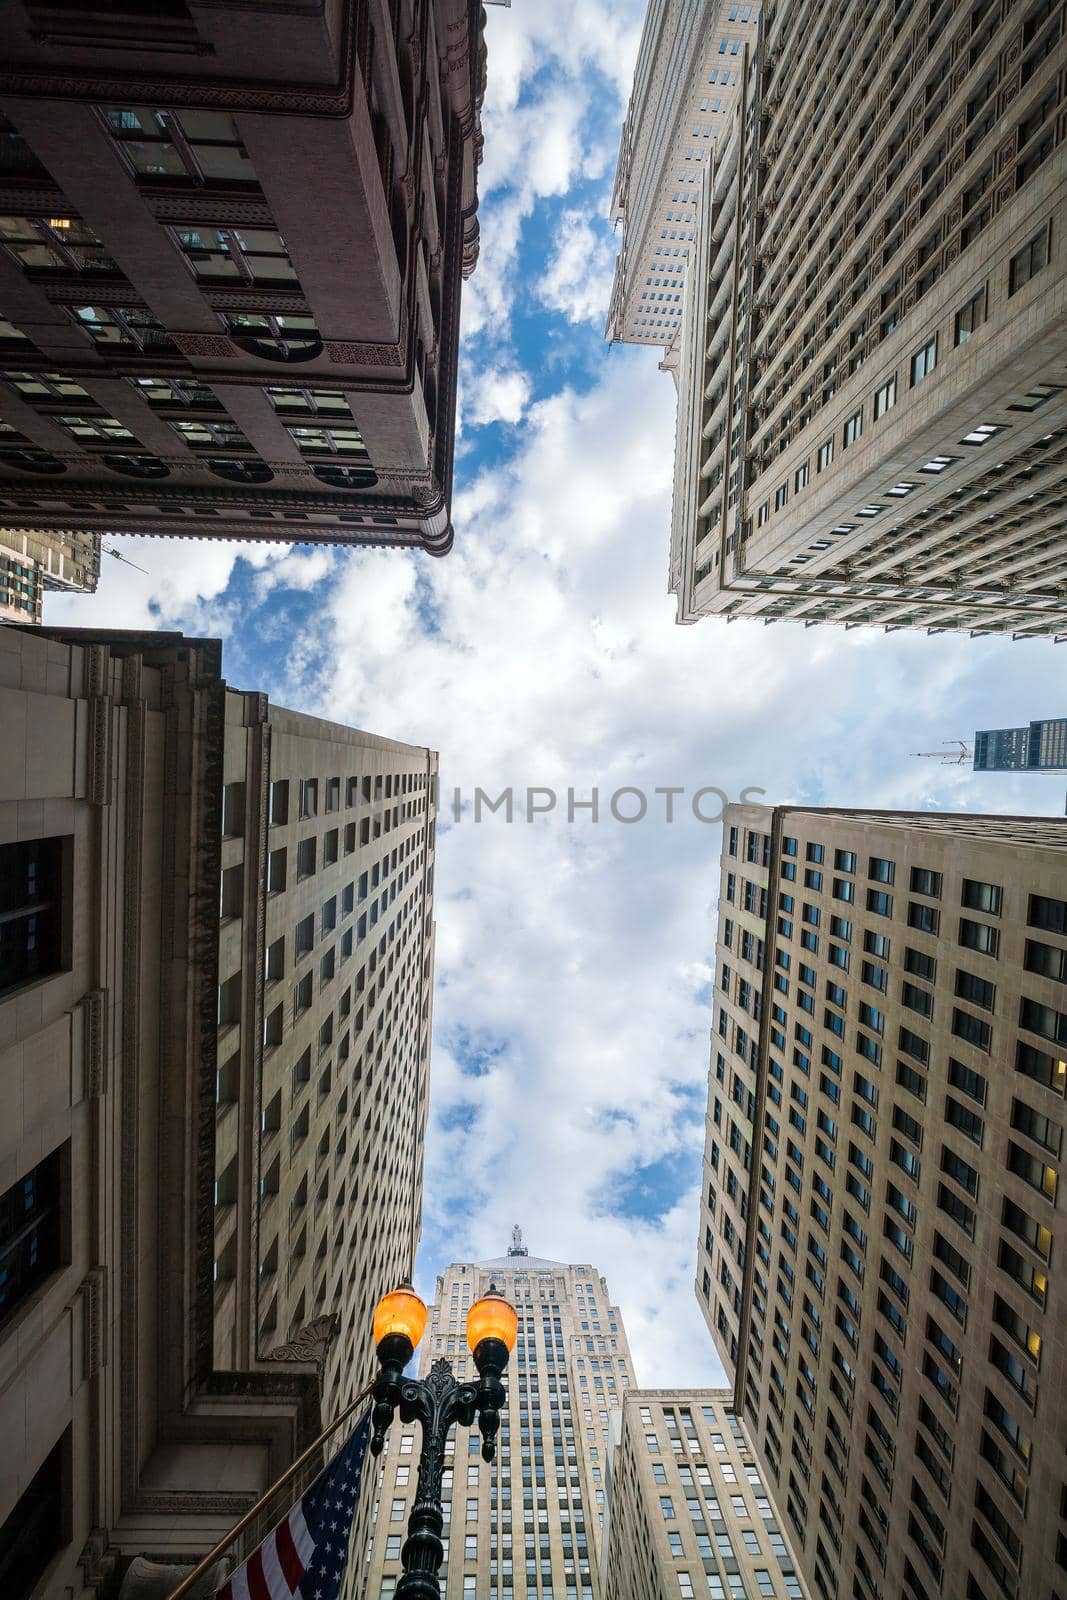 Looking up at Chicago's vintage building in financial districtbuildings, chicago, business, up, plane, tower, usa, urban, modern, downtown, view, us, landmark, tall, america, tallest, aircraft, exterior, glass, travel, blue, day, outdoors, skyscraper, megalopolis, destinations, airliner, contemporary, highrise, finance, financial district, sears, metropolis, famous, reflection, airplane, architecture, city, concrete jungle, willis, aeroplane, office, illinois, facade by f11photo